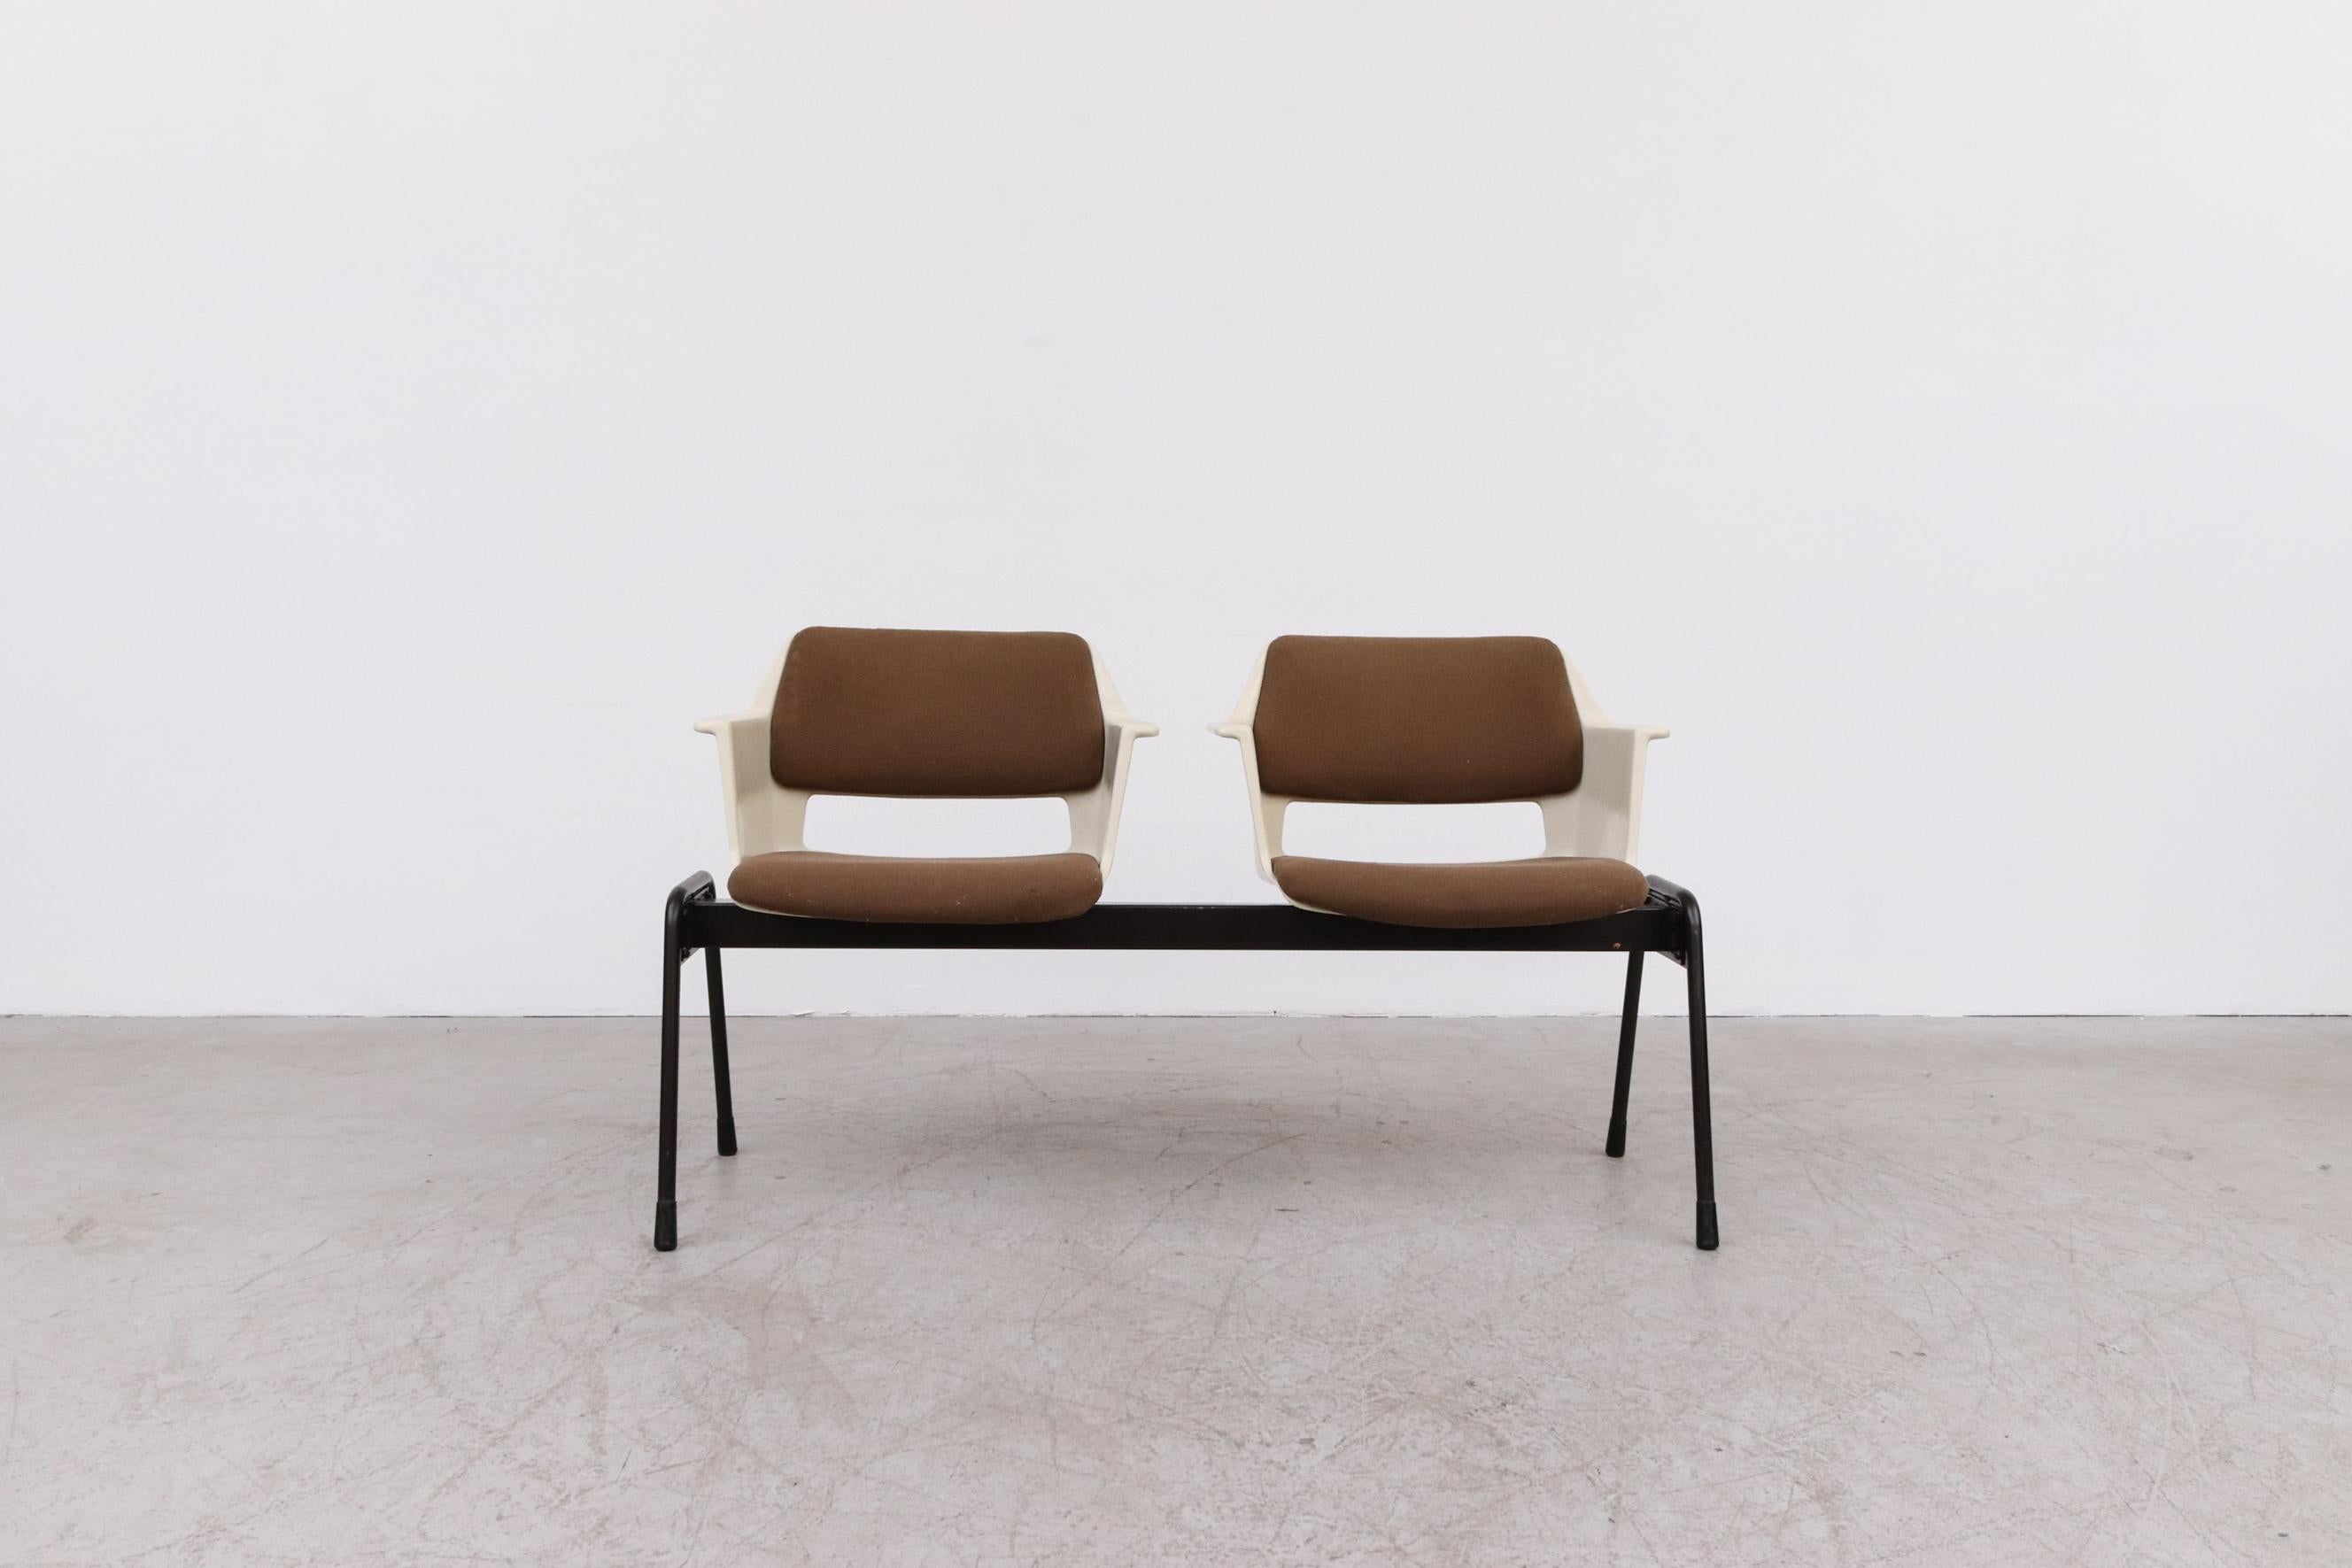 Double bucket seated bench by A.R. Cordemeyer for Gispen. Acrylic cast bucket shell seats with original brown upholstered seating on a black enameled tubular metal frame. In original condition with visible patina. Wear consistent with its age and